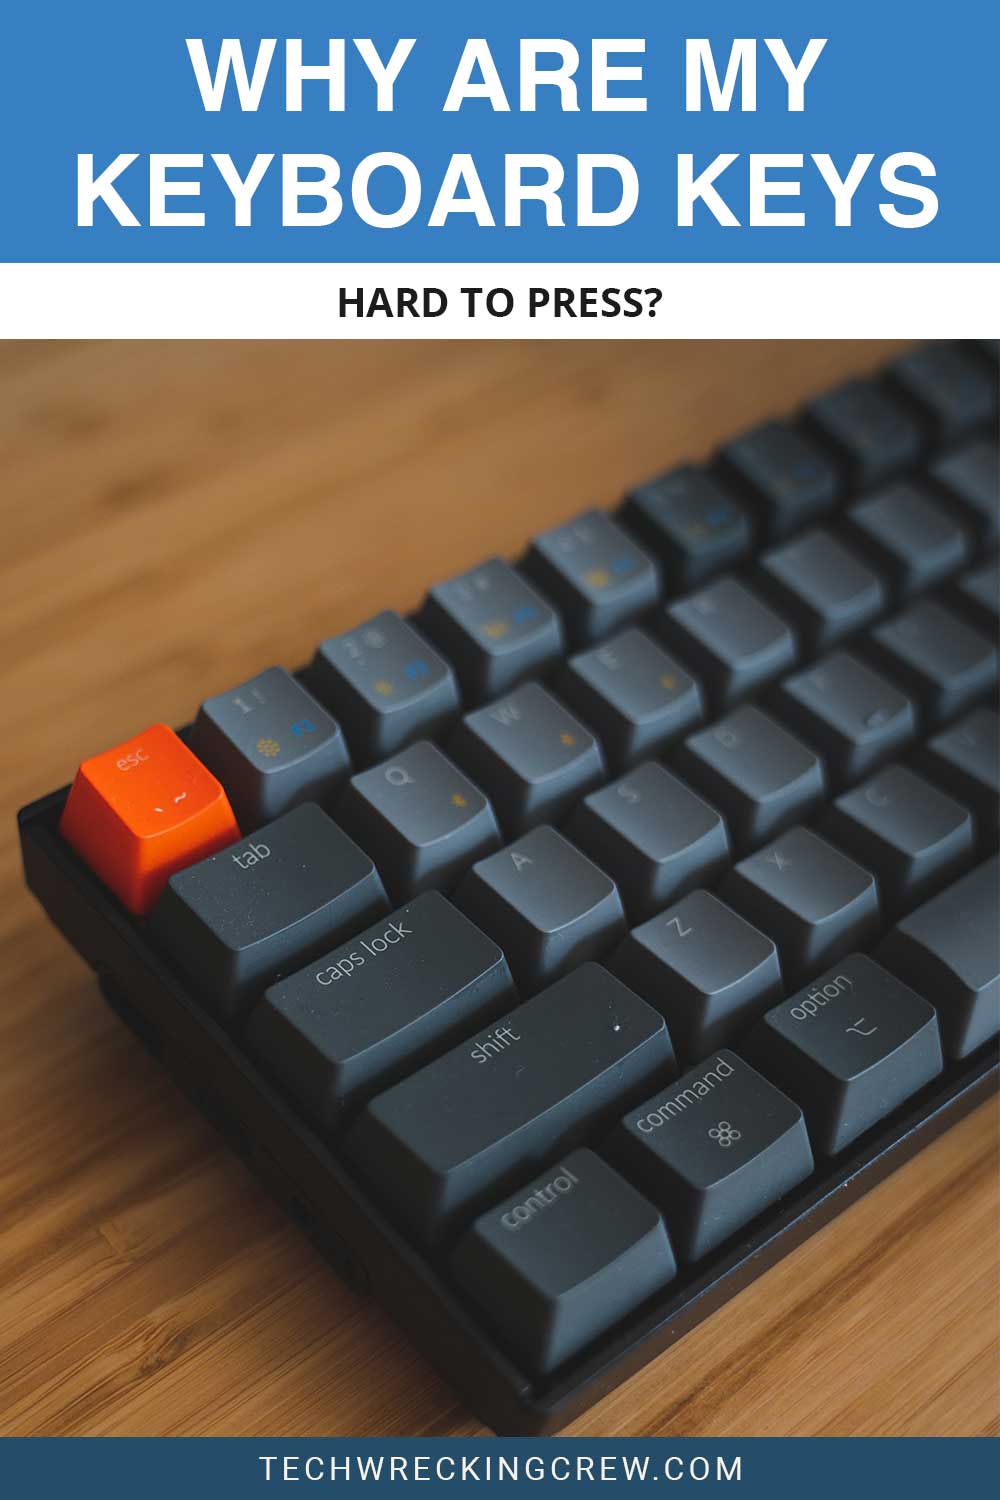 Why Are My Keyboard Keys Hard to Press?